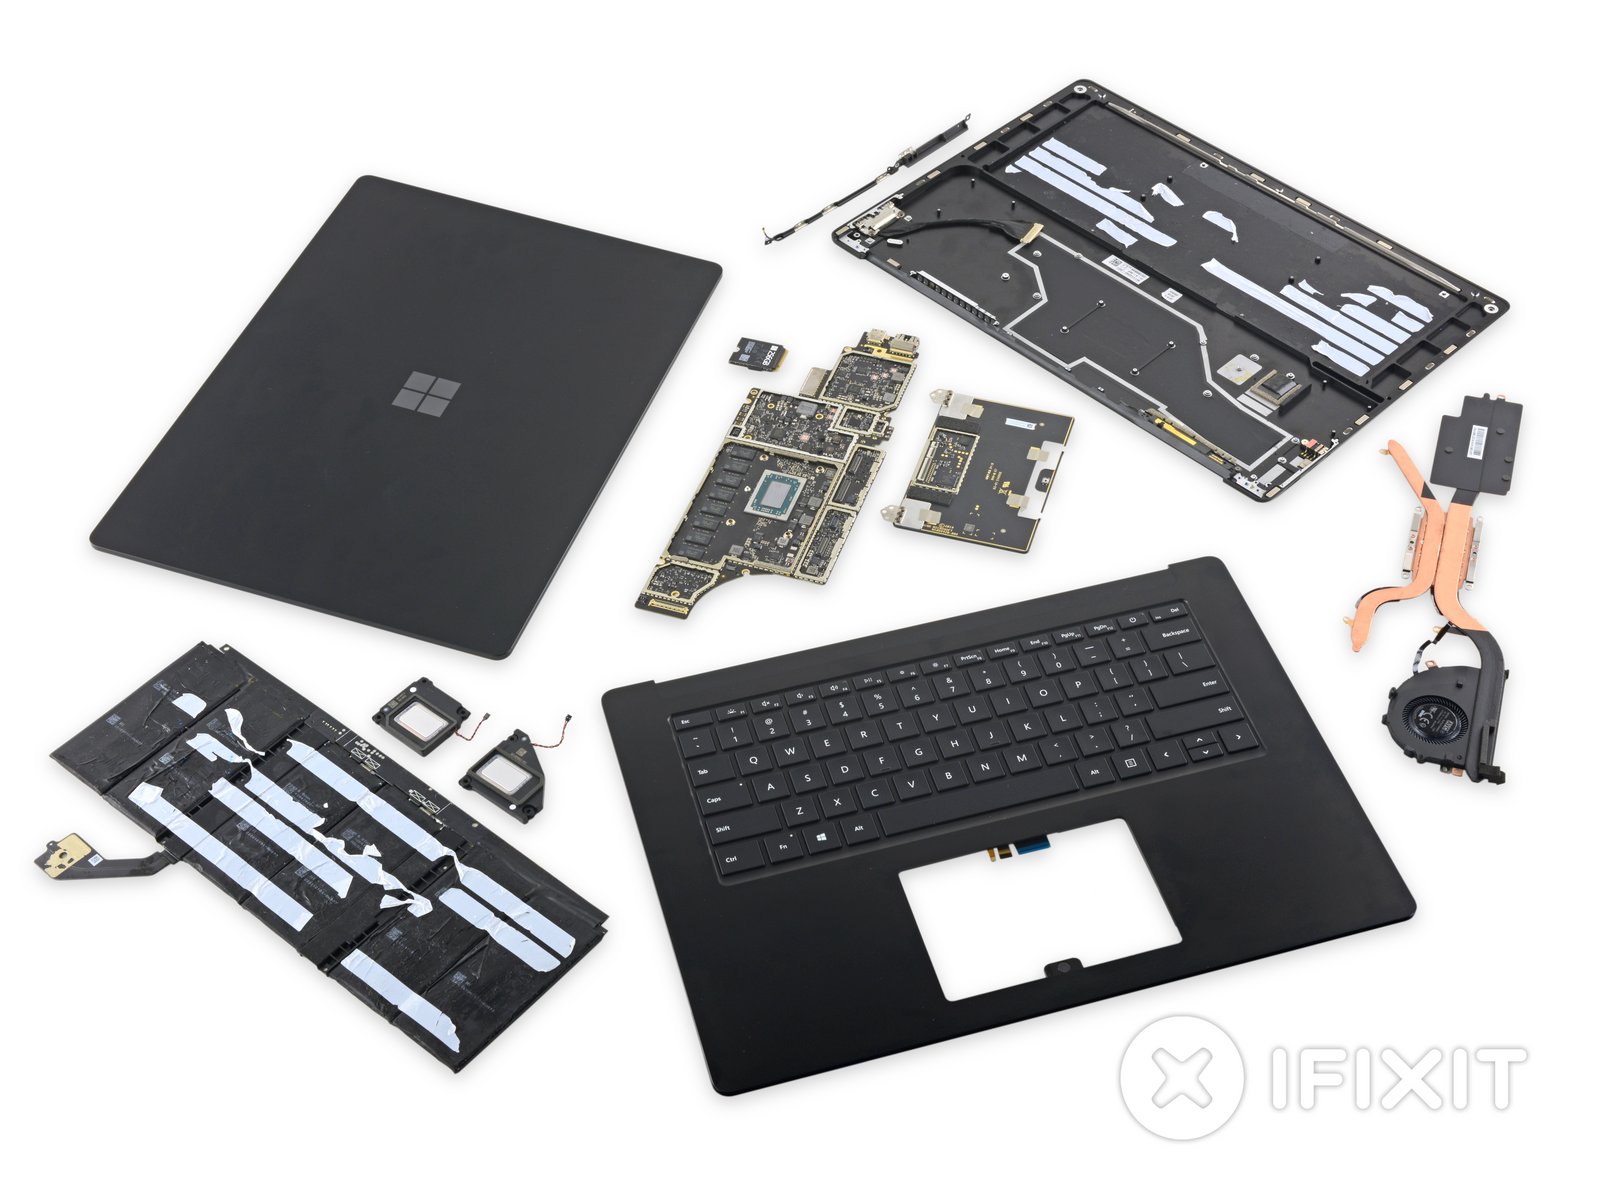 IFixit exposes guts of Surface Laptop 3, comes away surprised